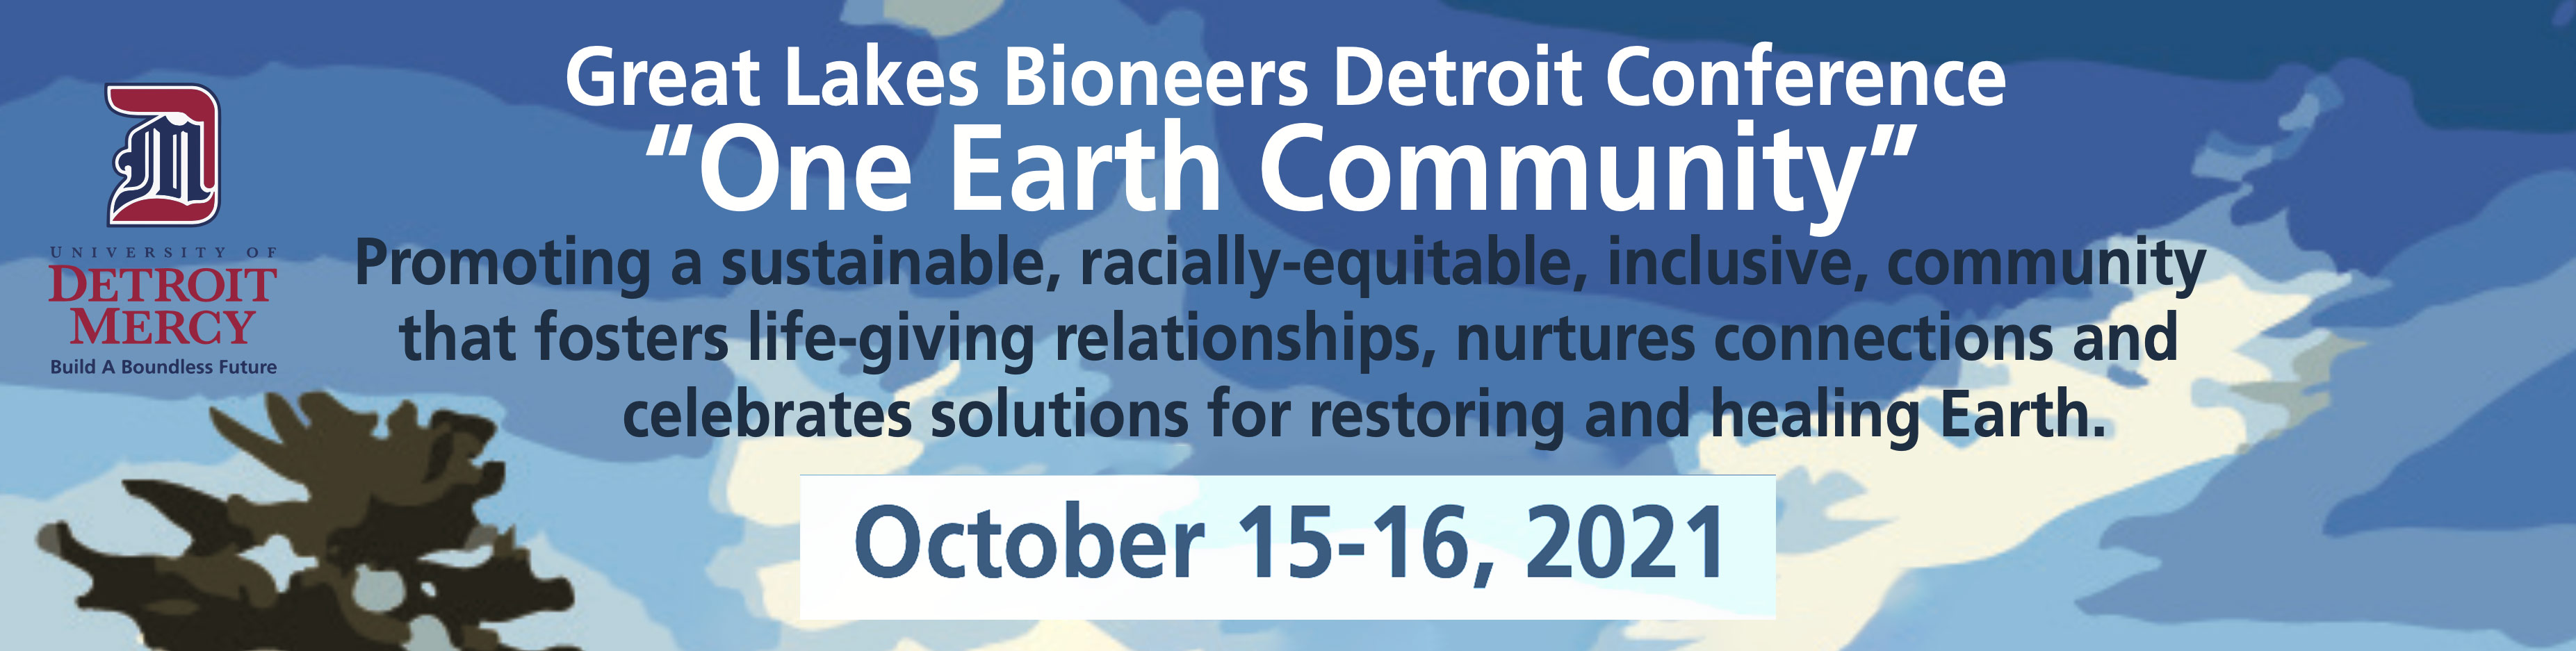 glbd great lakes bioneers detroit conference 2021 flyer